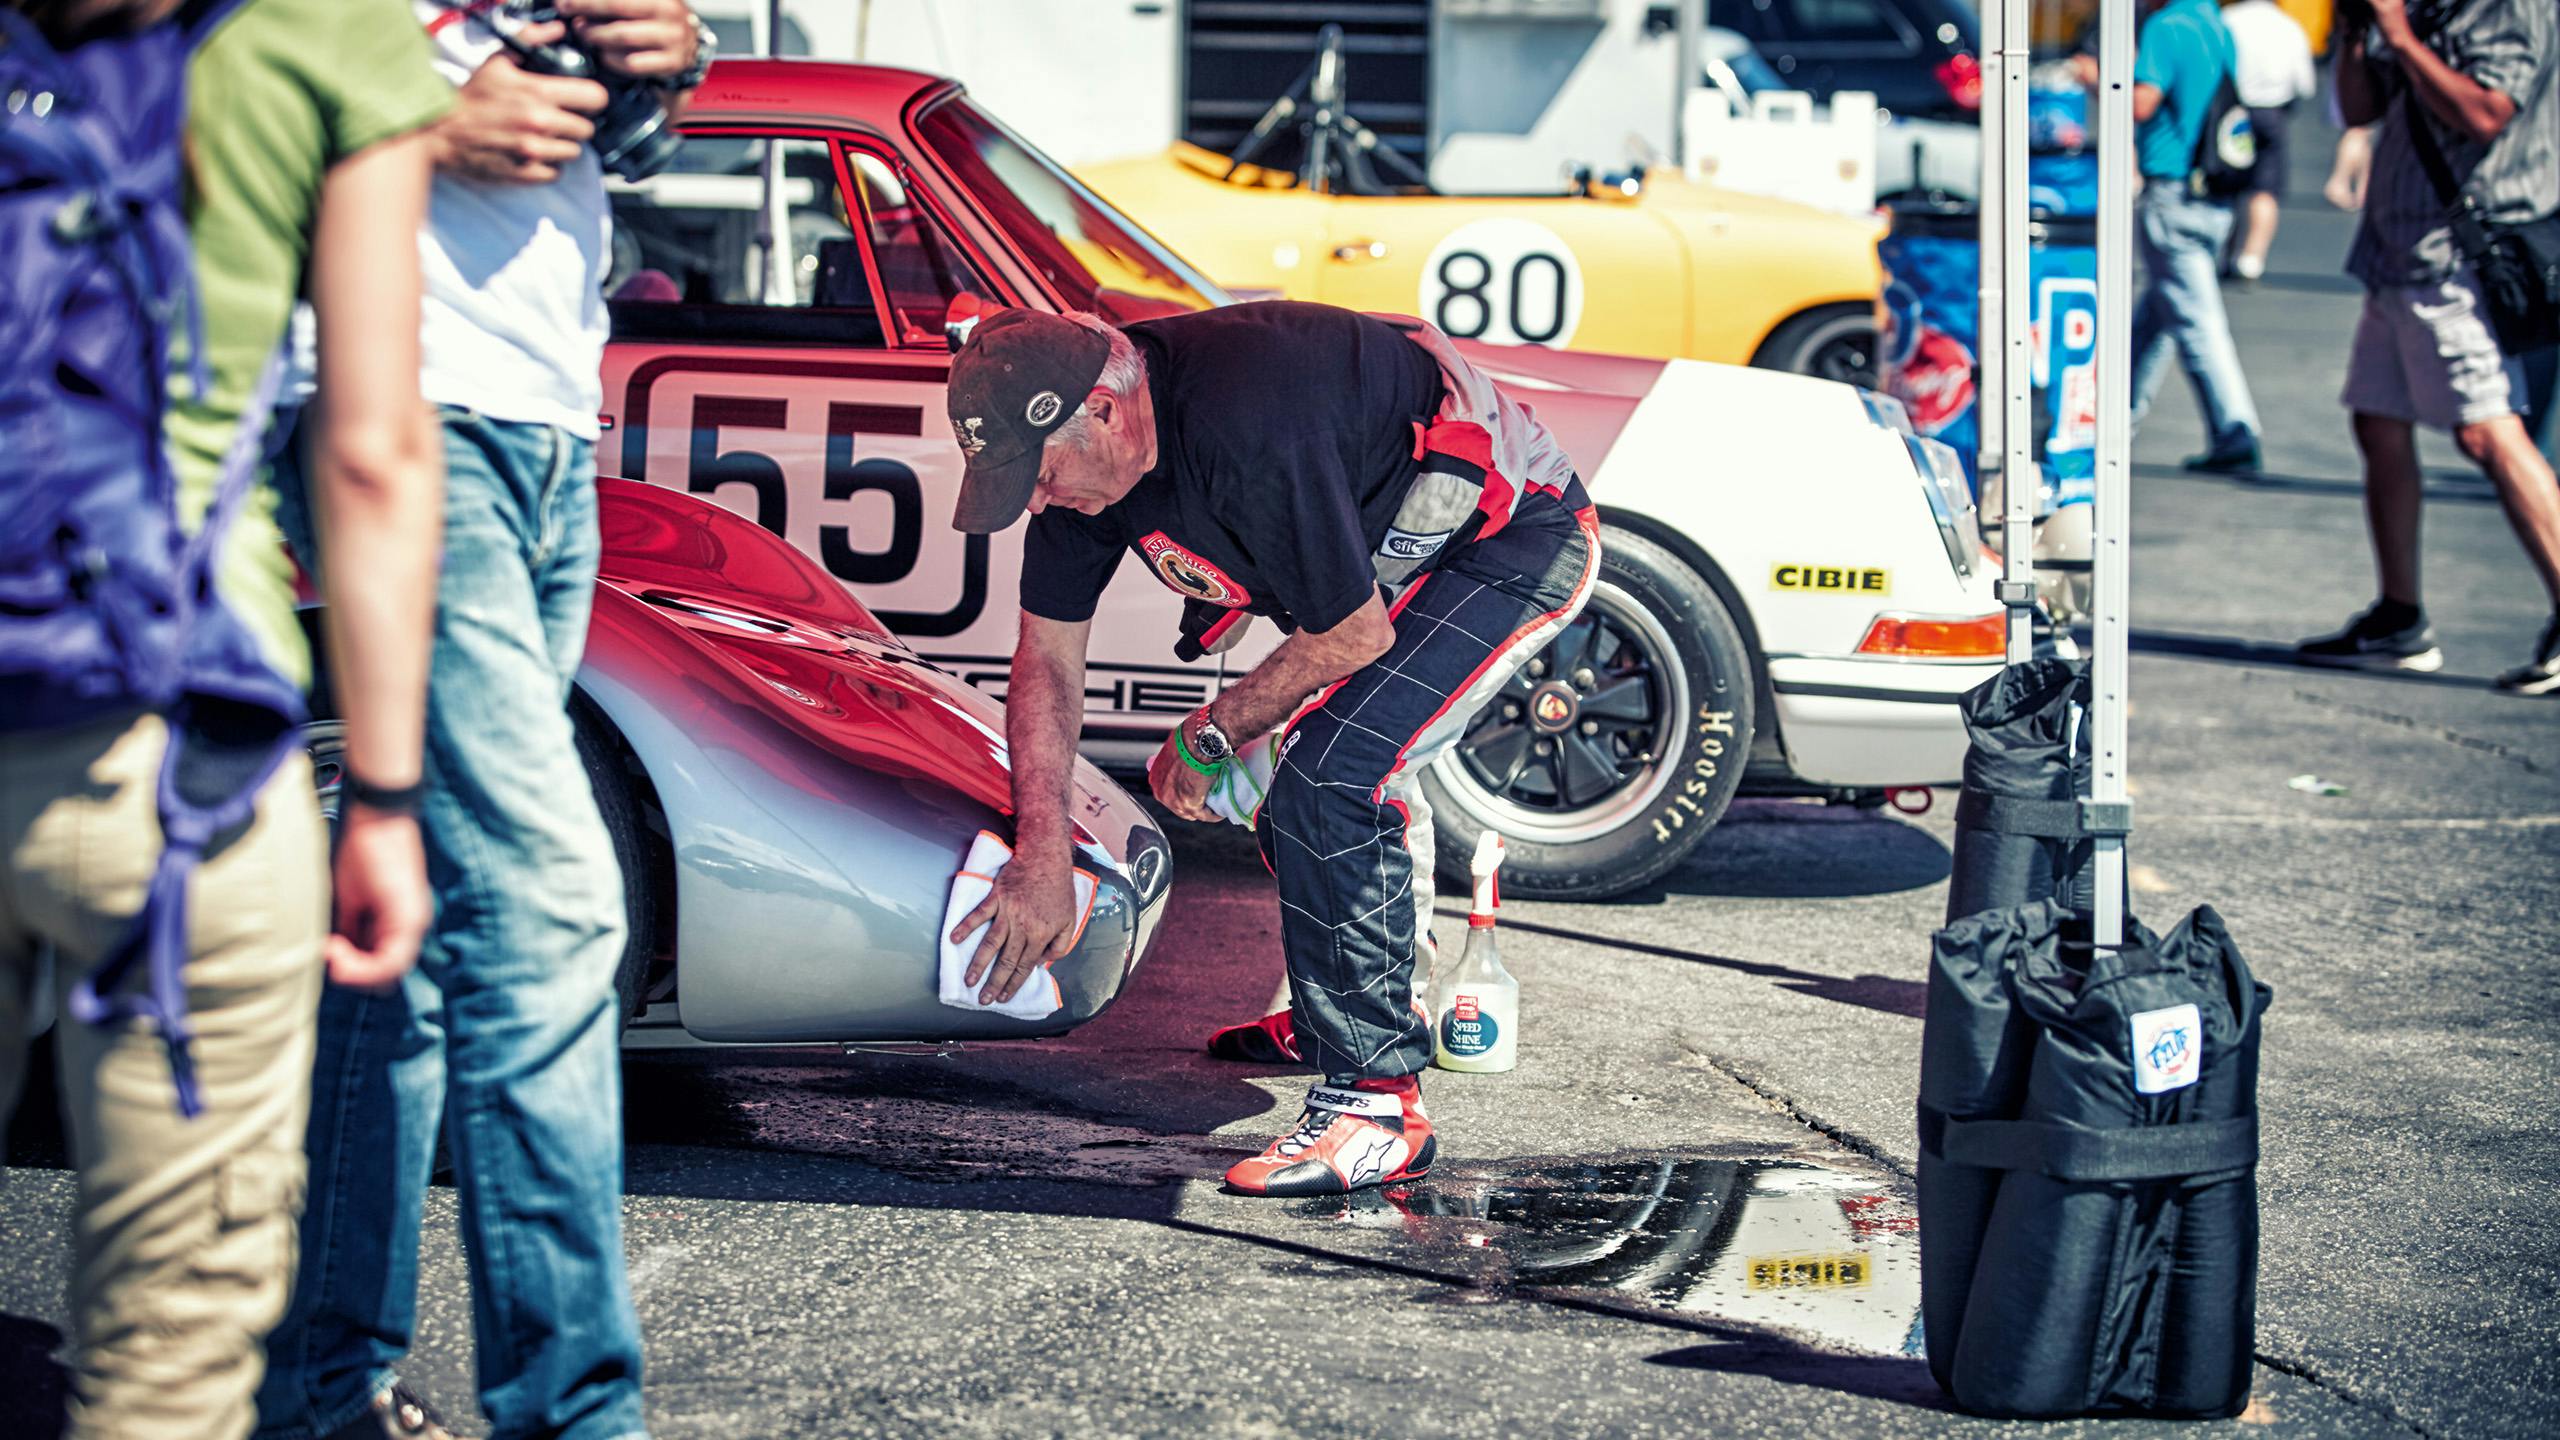 To see is a man as he cleans a vintage Porsche on a racetrack